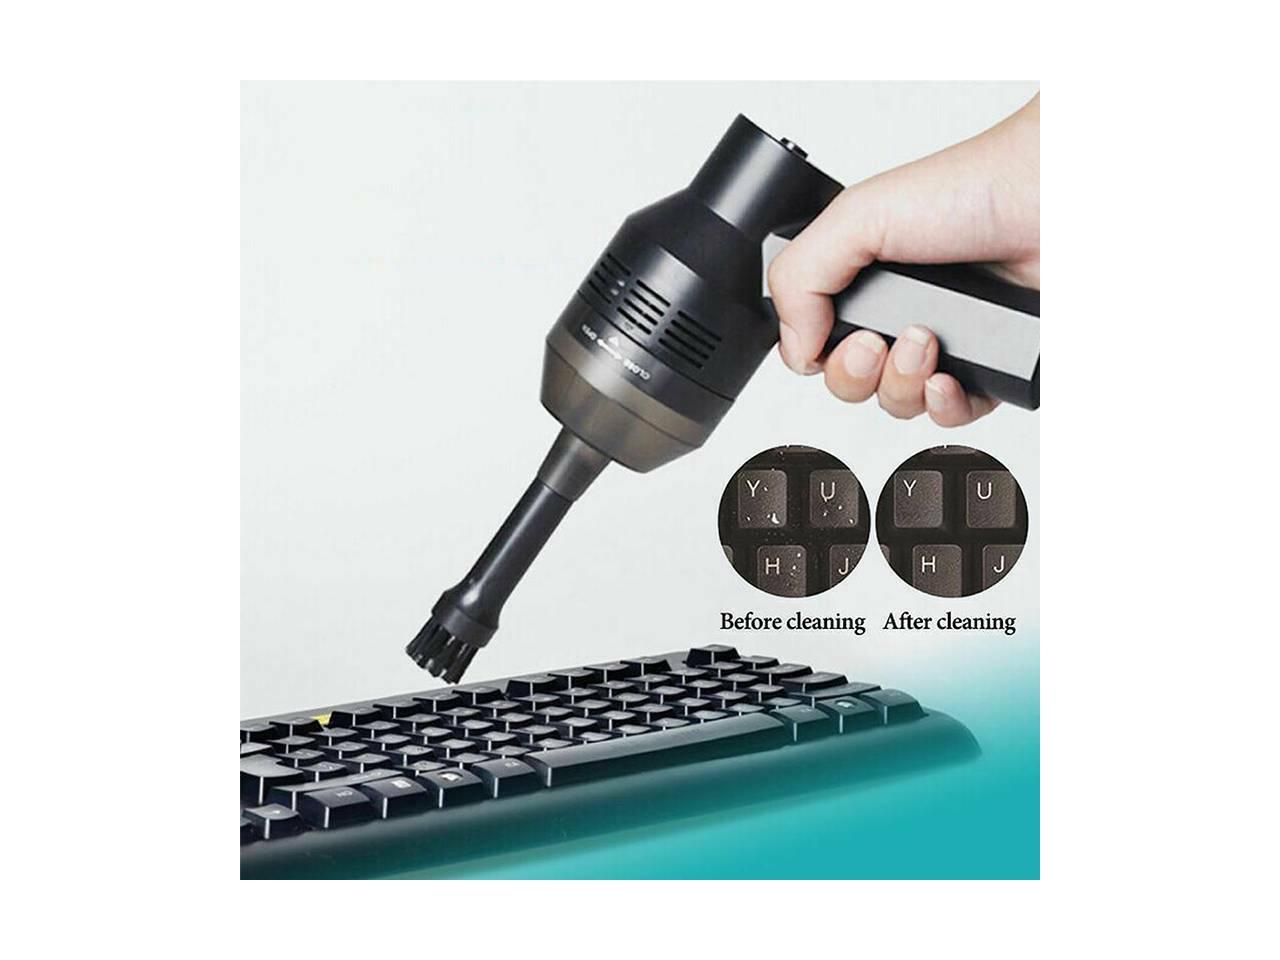 Pandamama Mini USB Keyboard Cleaner Microcomputer Cleaner Dust Removal Brush Notebook USB Vacuum Cleaner Keyboard Cleaner 